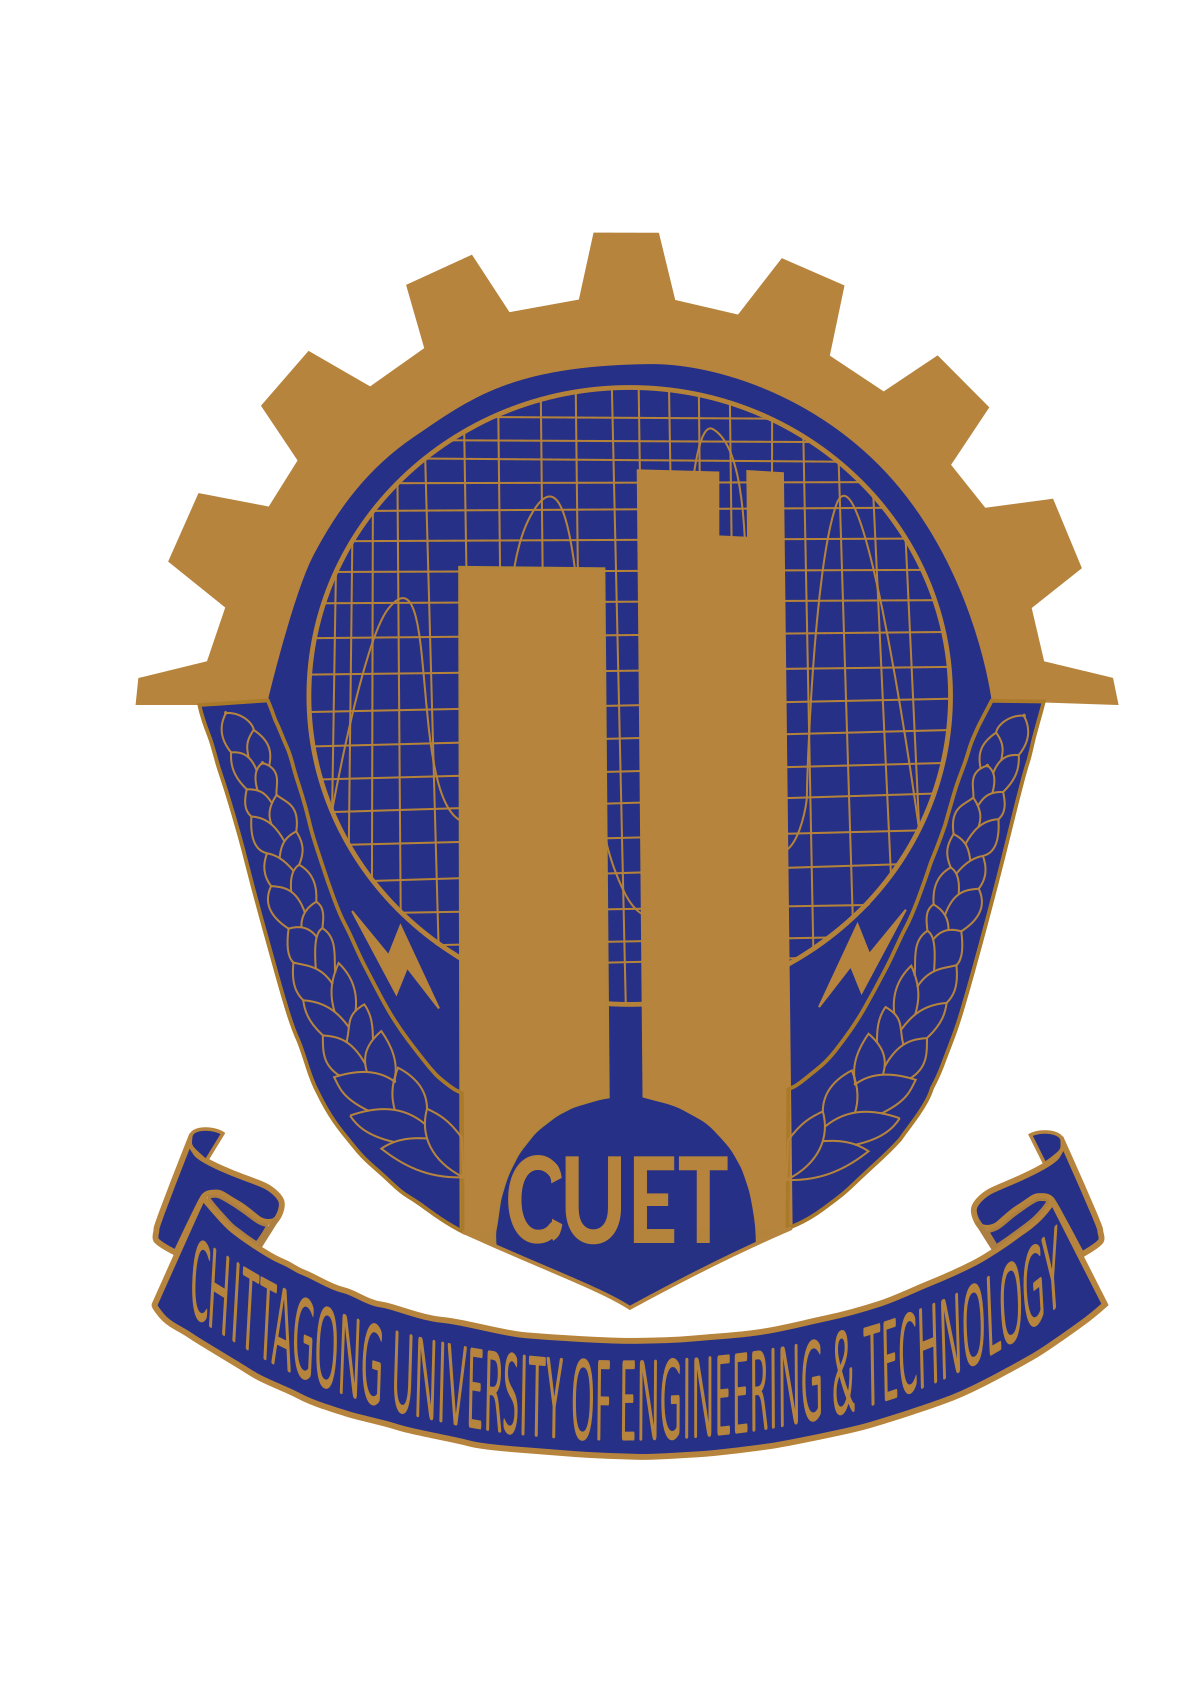 Chittagong University of Engineering and Technology